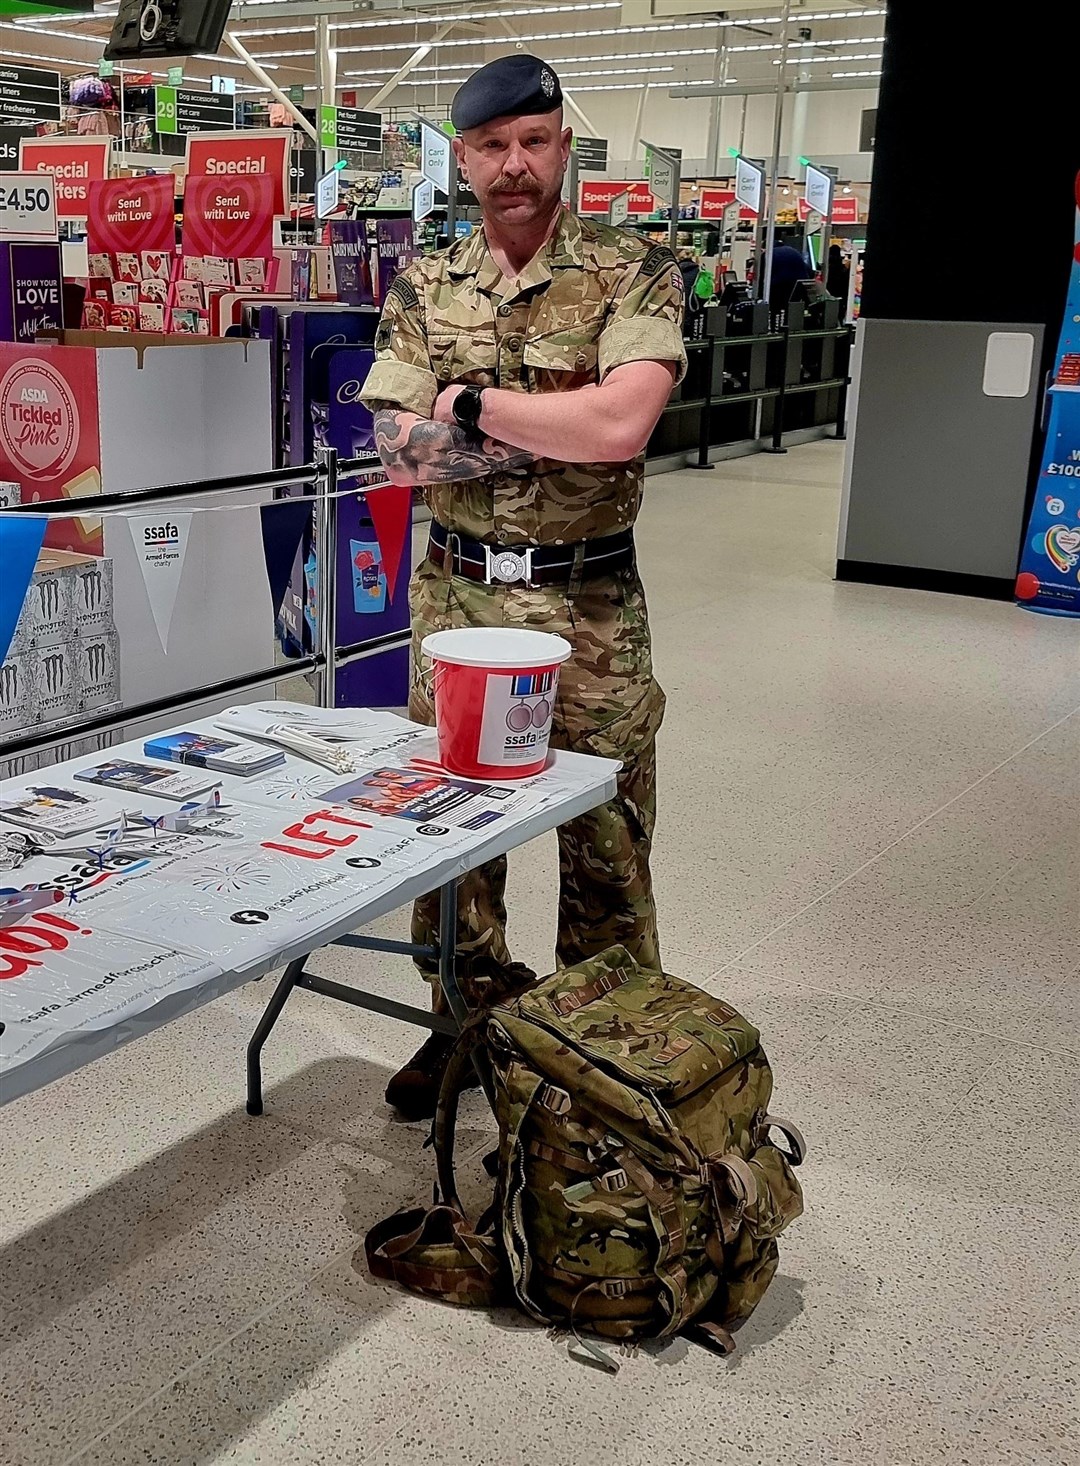 Dave Owen is taking on the London Marathon with a rucksack on his back and boots on his feet to raise funds for a charity that helped him with his mental health.